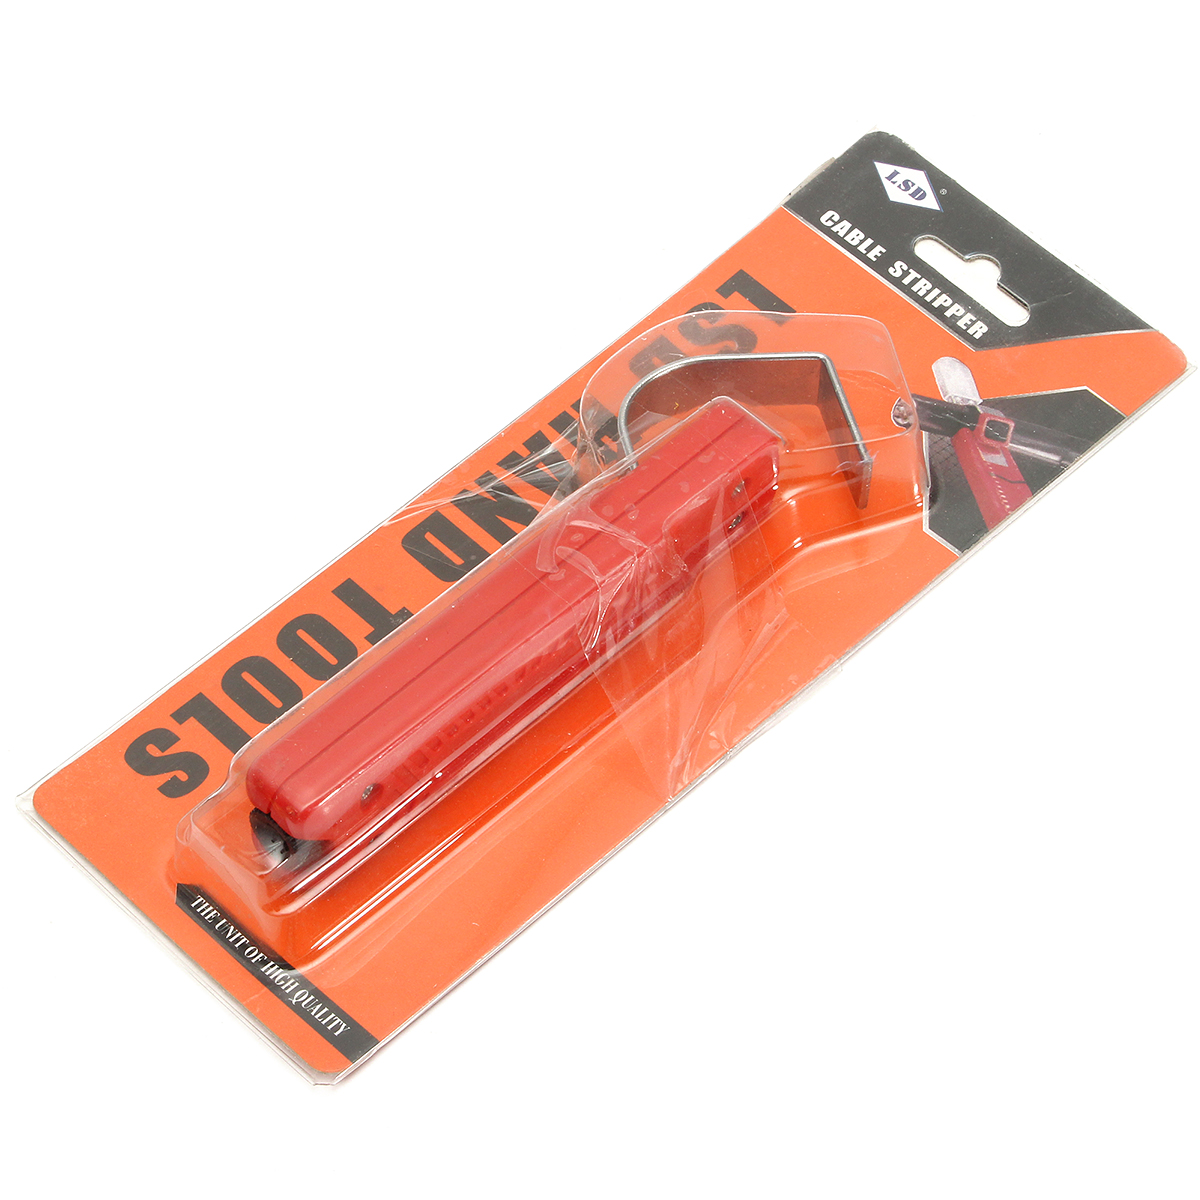 LY25-3-28-35mm-Wire-Stripper-Stripping-Cutter-Plier-Crimping-Tool-For-PVC-Rubber-Cable-1125757-8